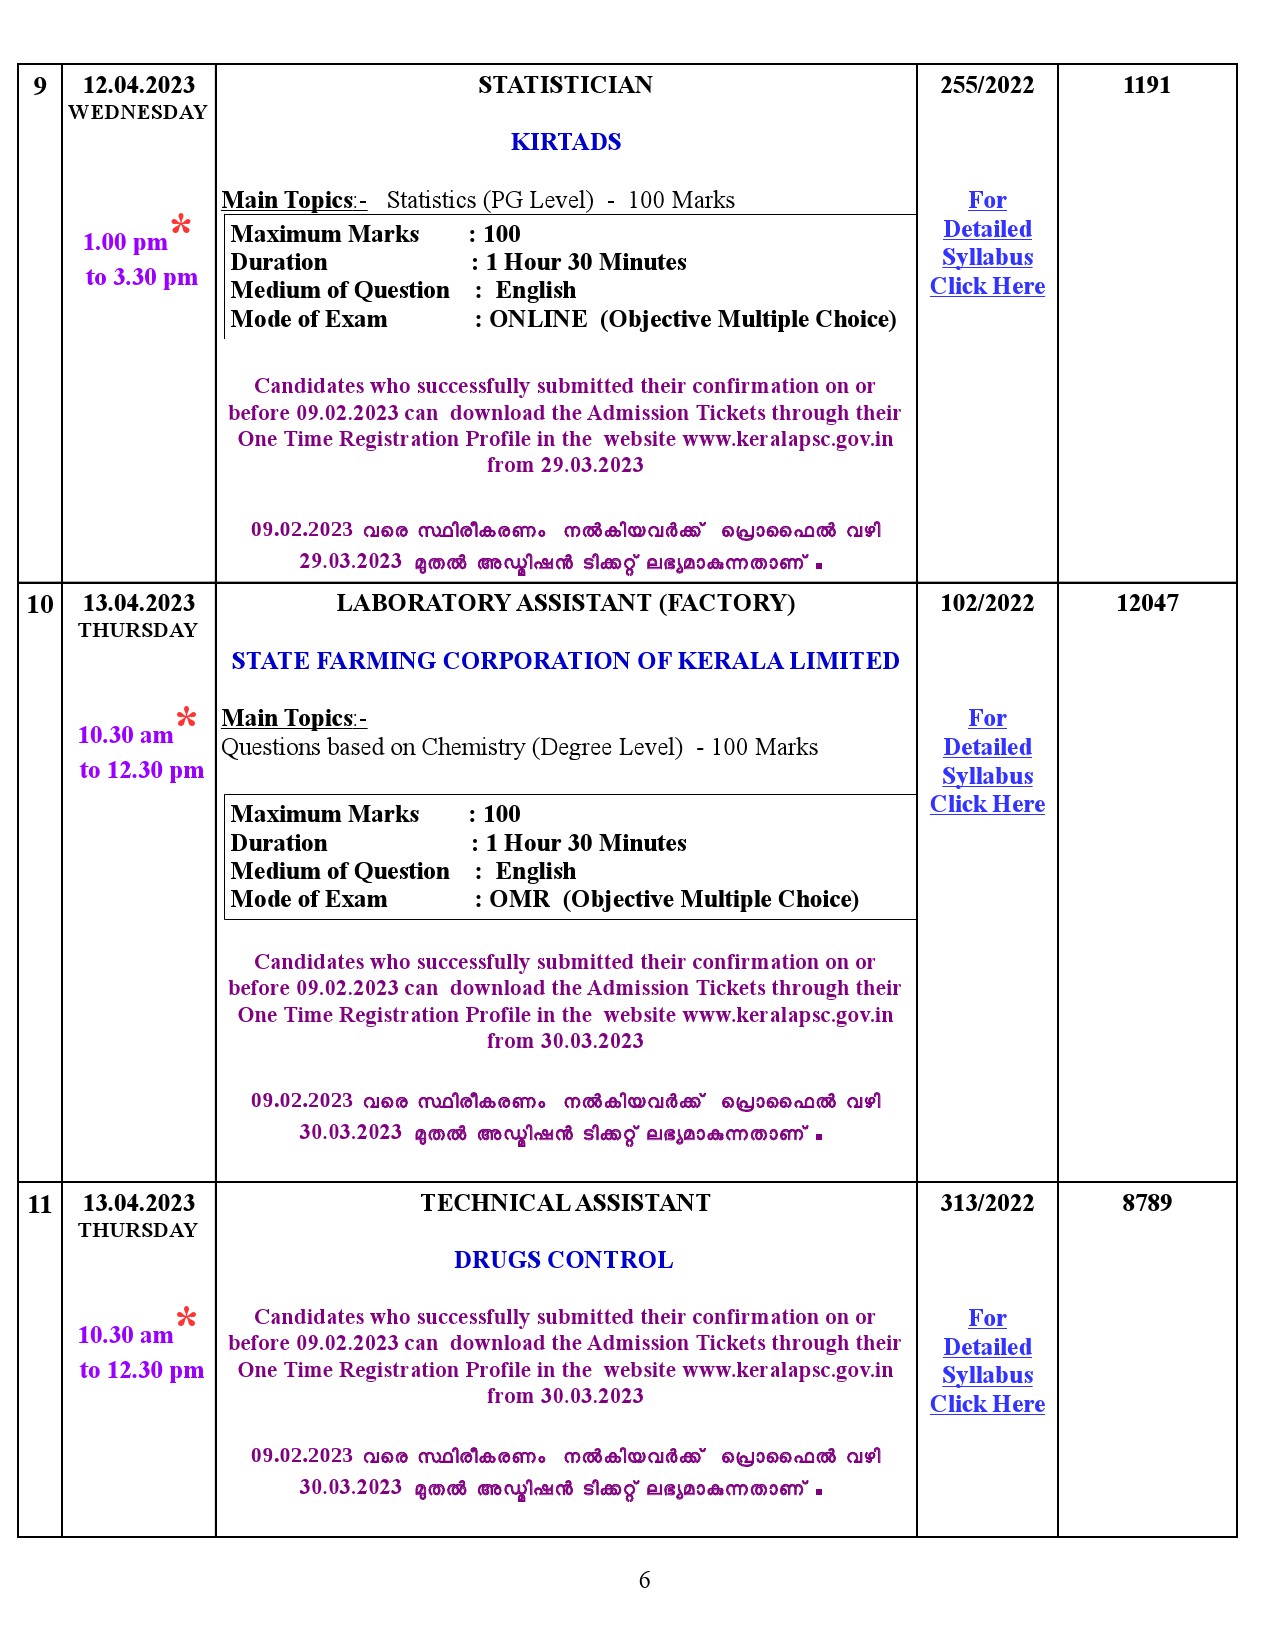 Examination Programme For The Month Of April 2023 - Notification Image 6